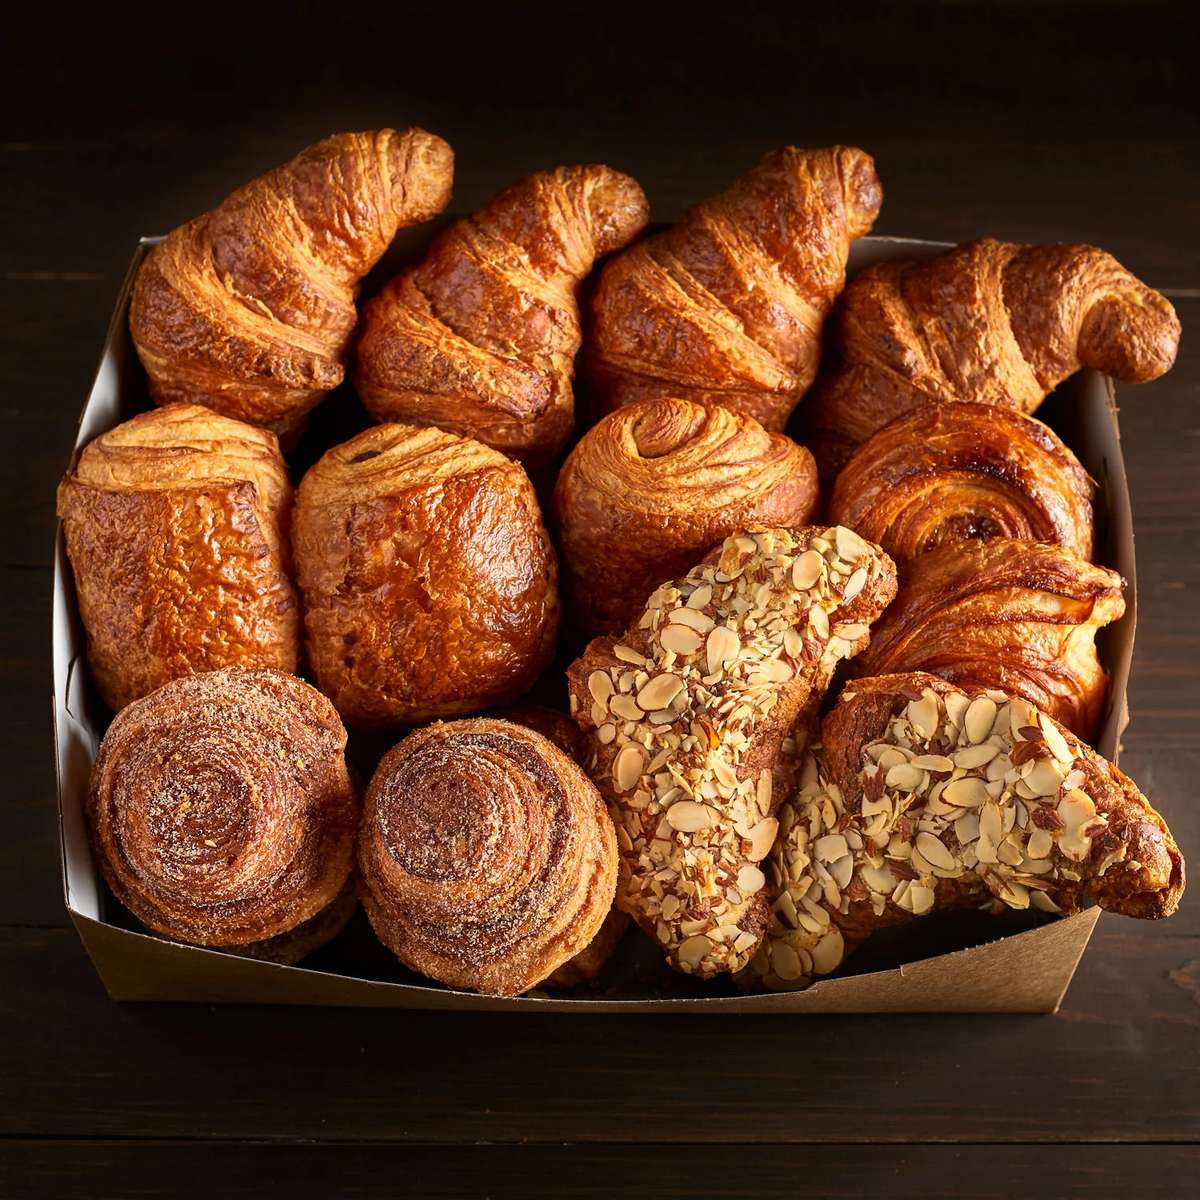 variety of breads, croissants, and pastries